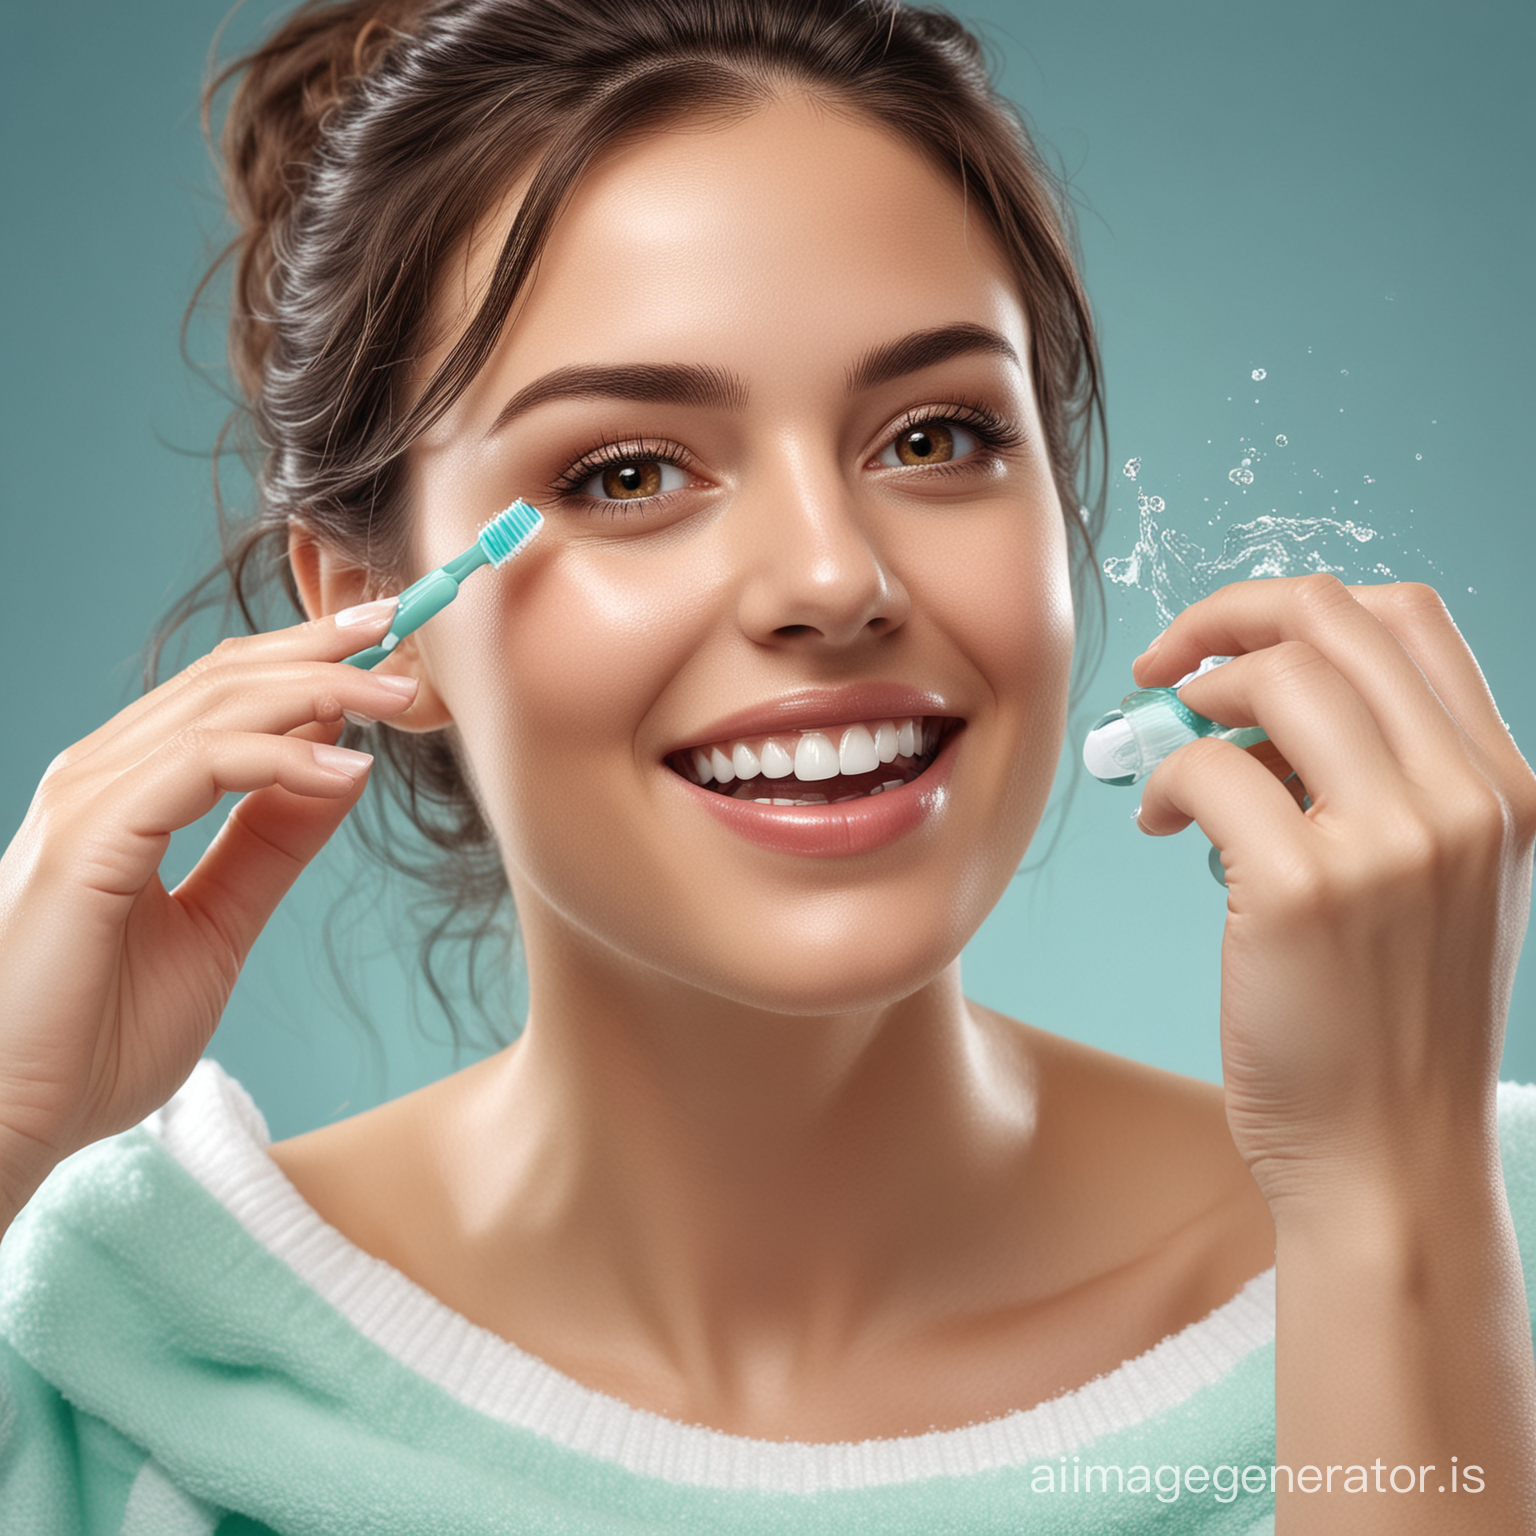 create a 3d image illustration of a woman washing her teeth with magical cleaning teeth oils